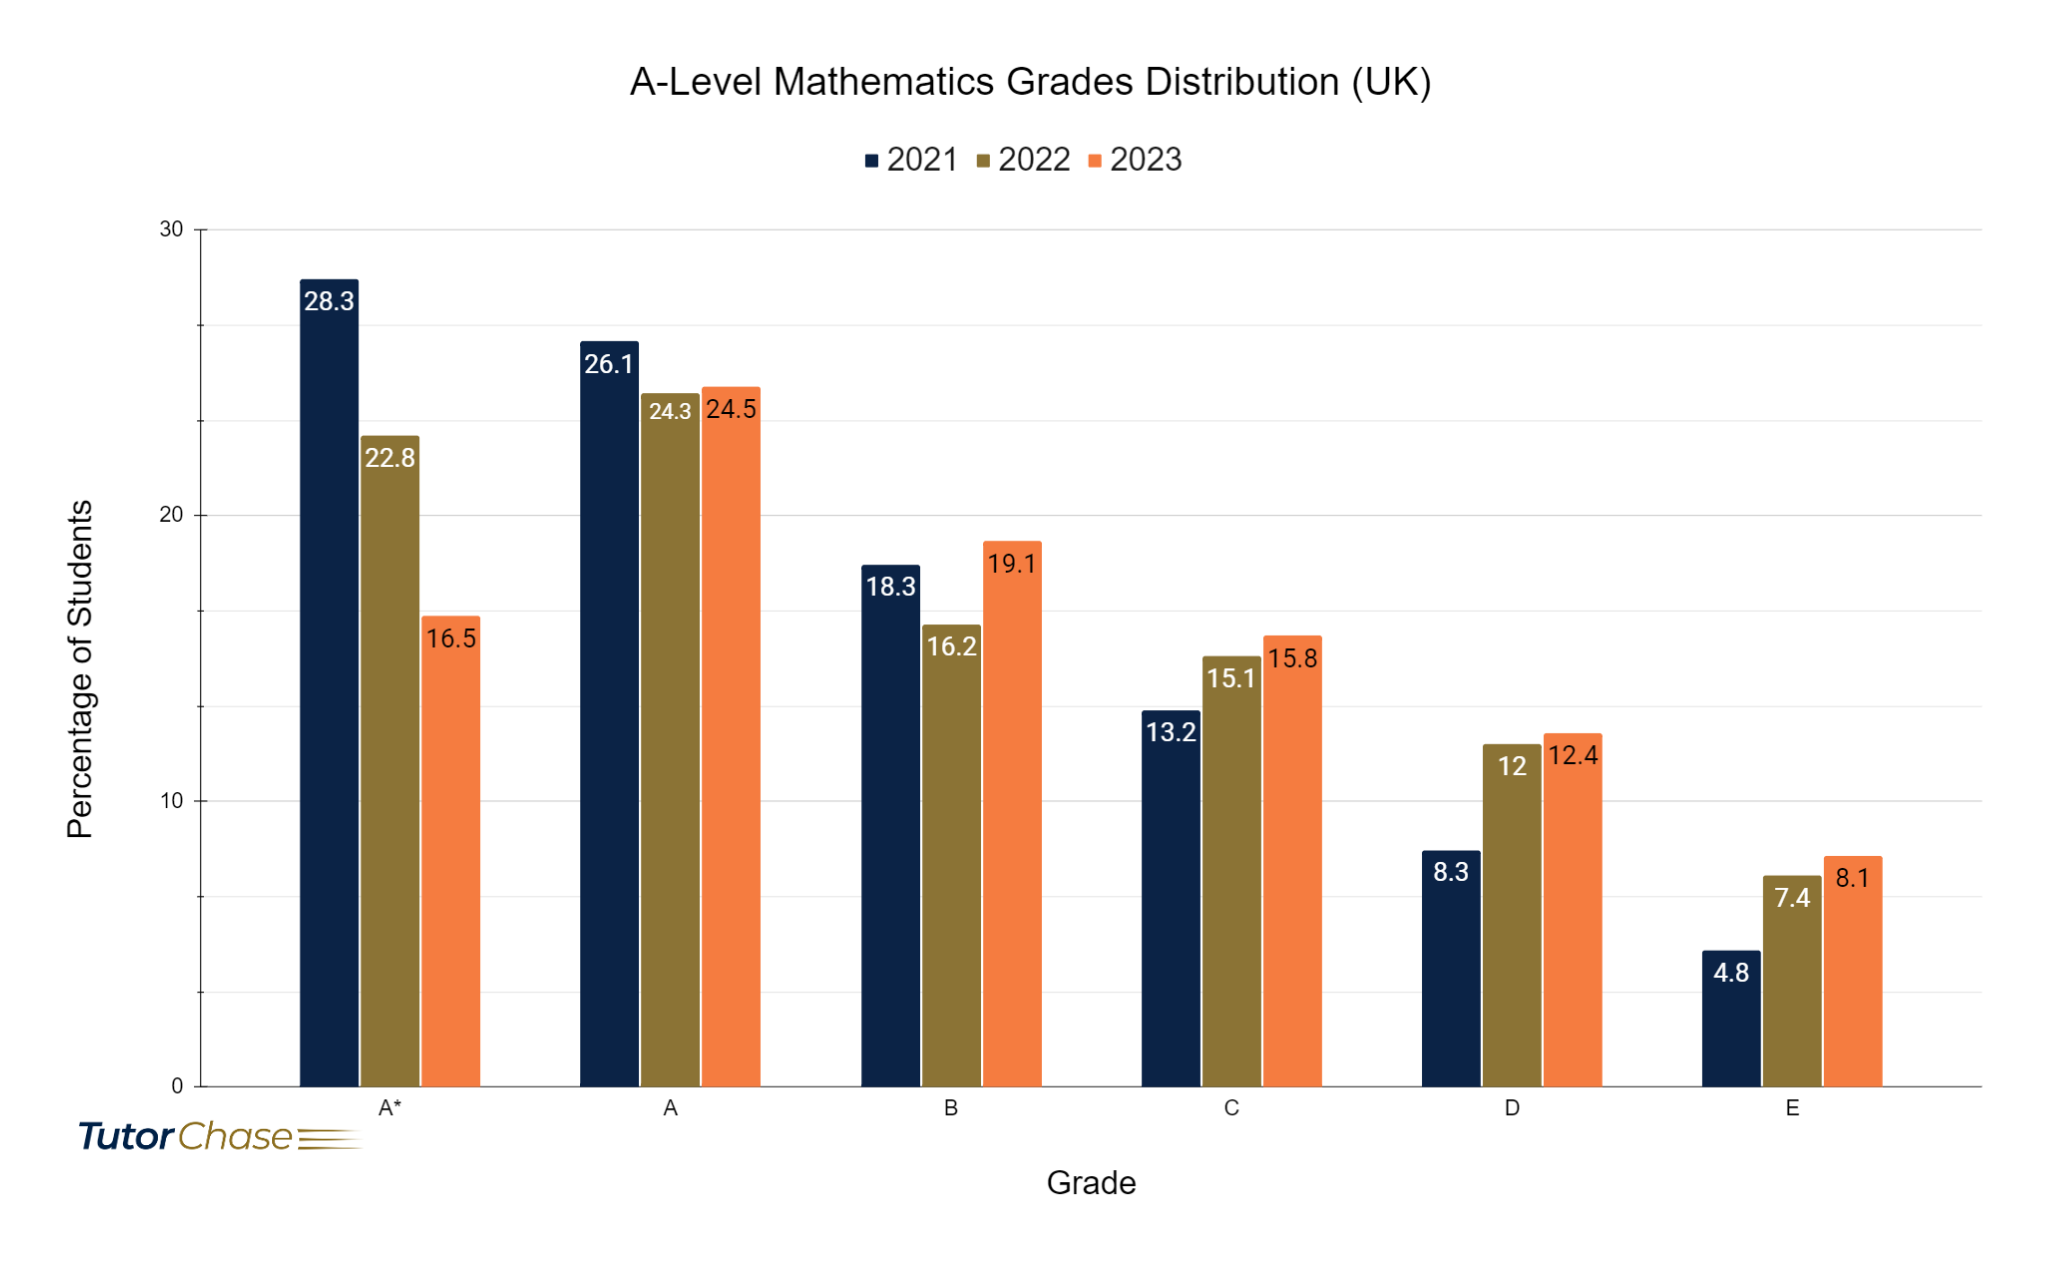 Grades distribution of A-Level Mathematics in UK 2021-2023